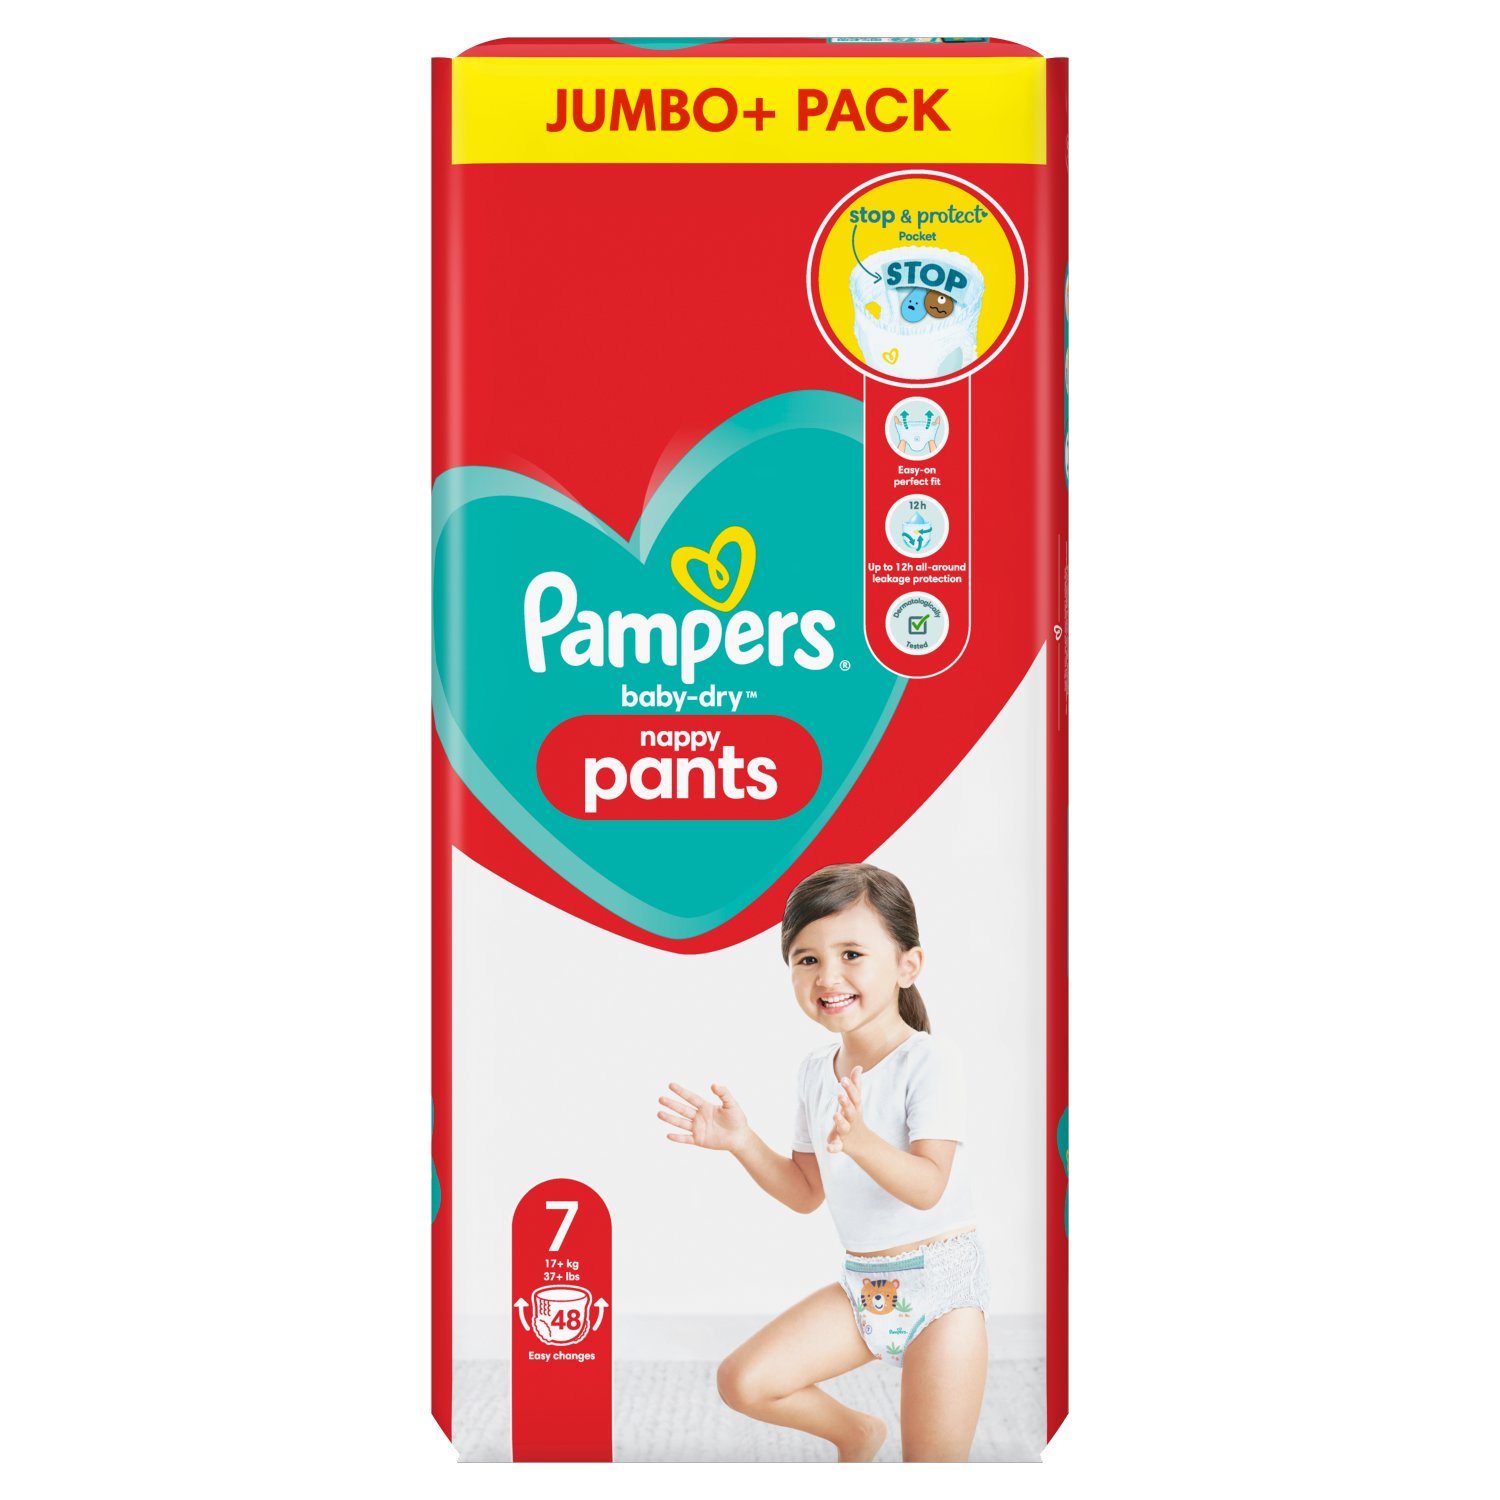 Pampers Baby-Dry Nappy Pants Size 7 Jumbo+ Pack (48 Piece)